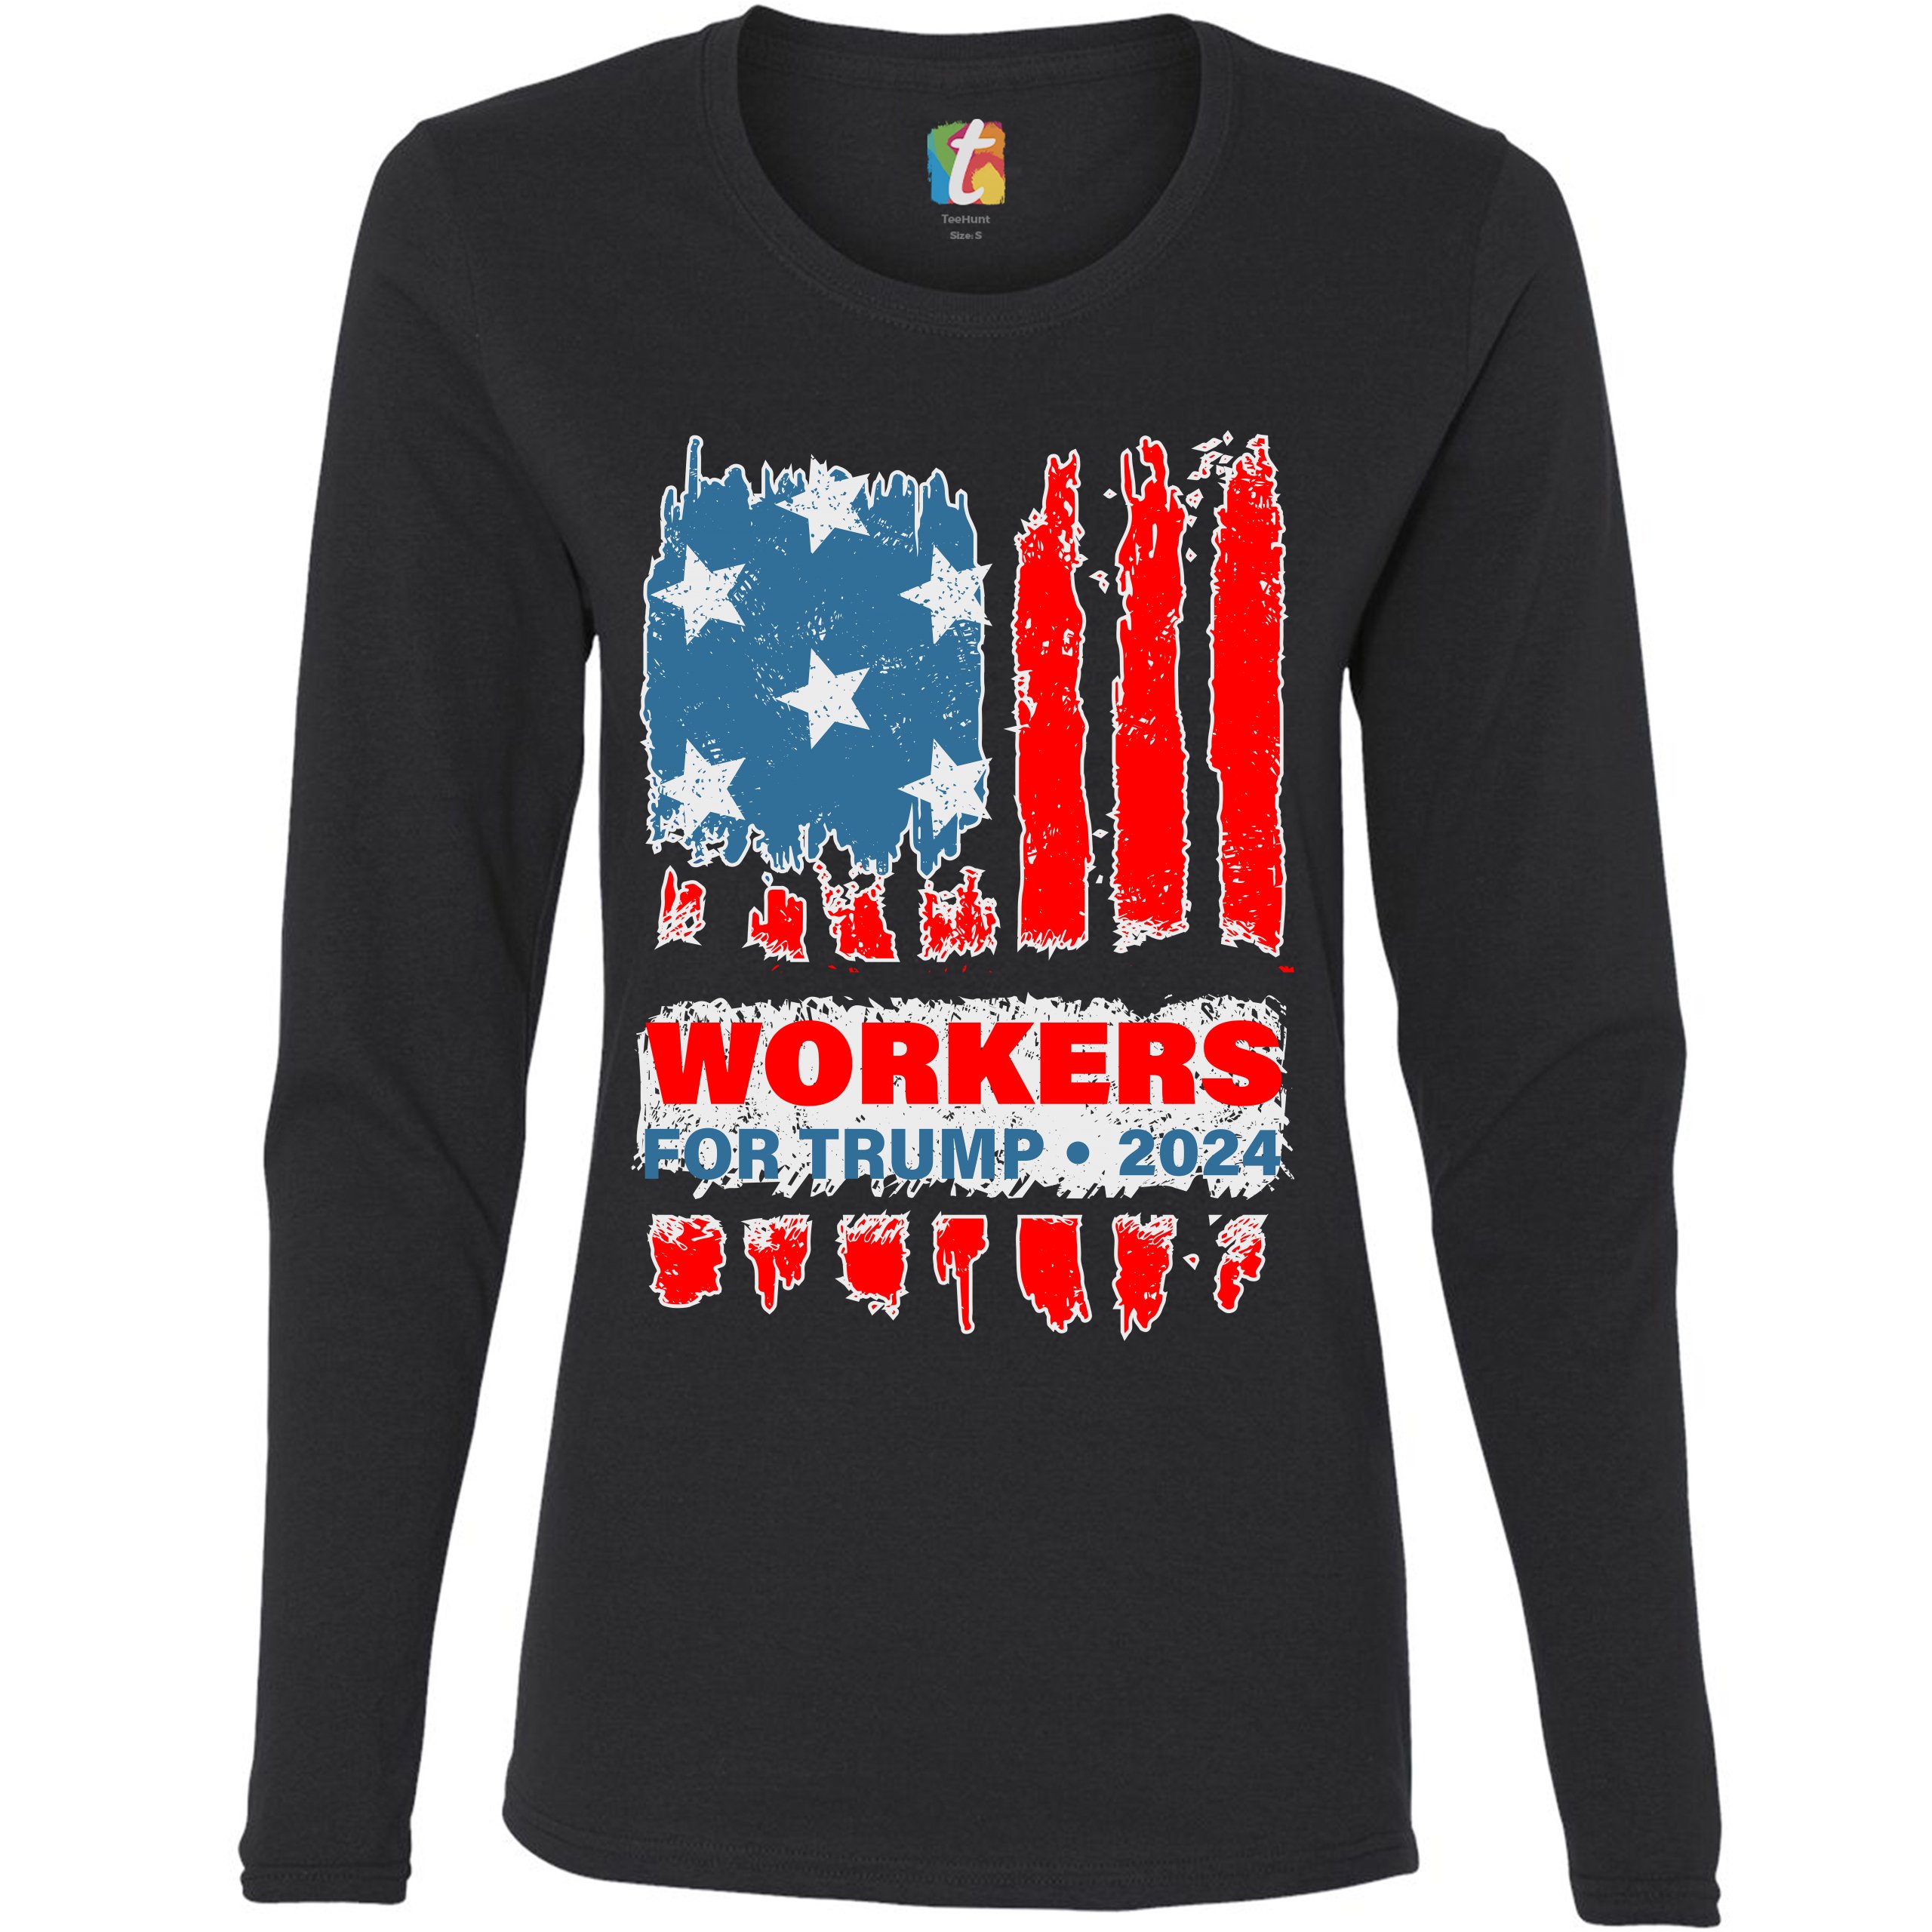 Workers for Trump 2024 Women's Long Sleeve Tshirt Conservative Vote